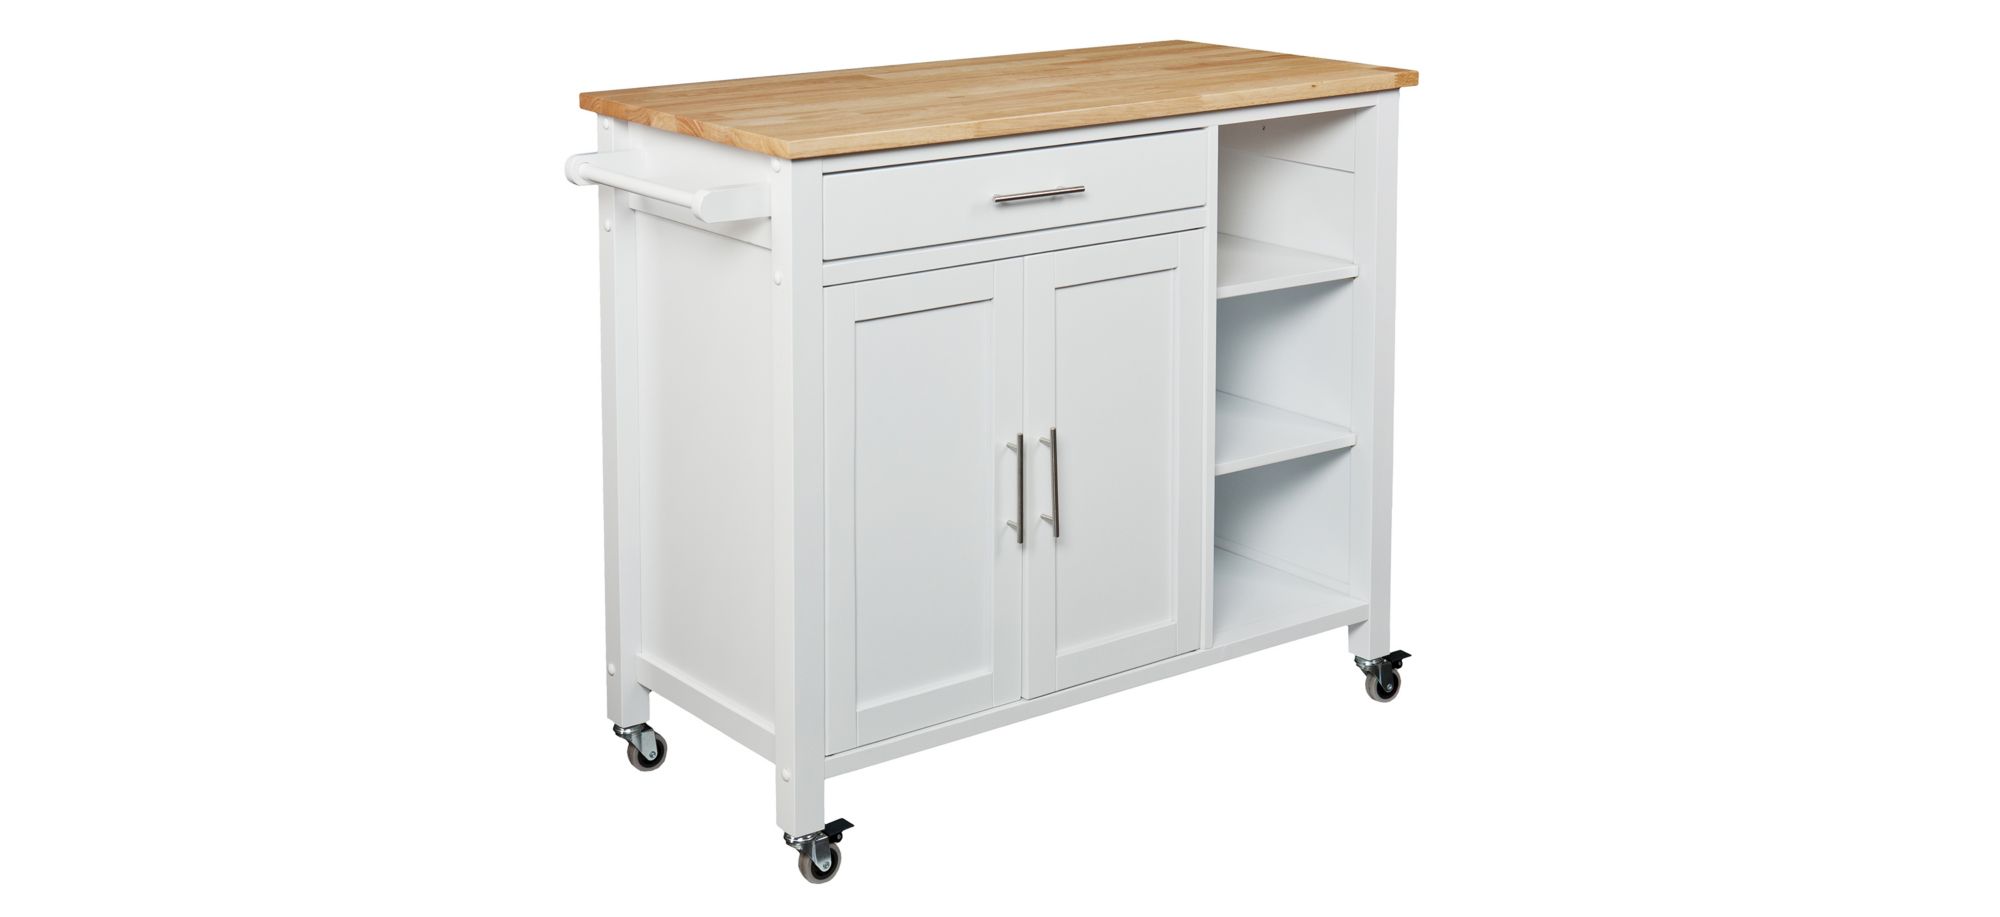 Easterday Kitchen Cart in White by SEI Furniture